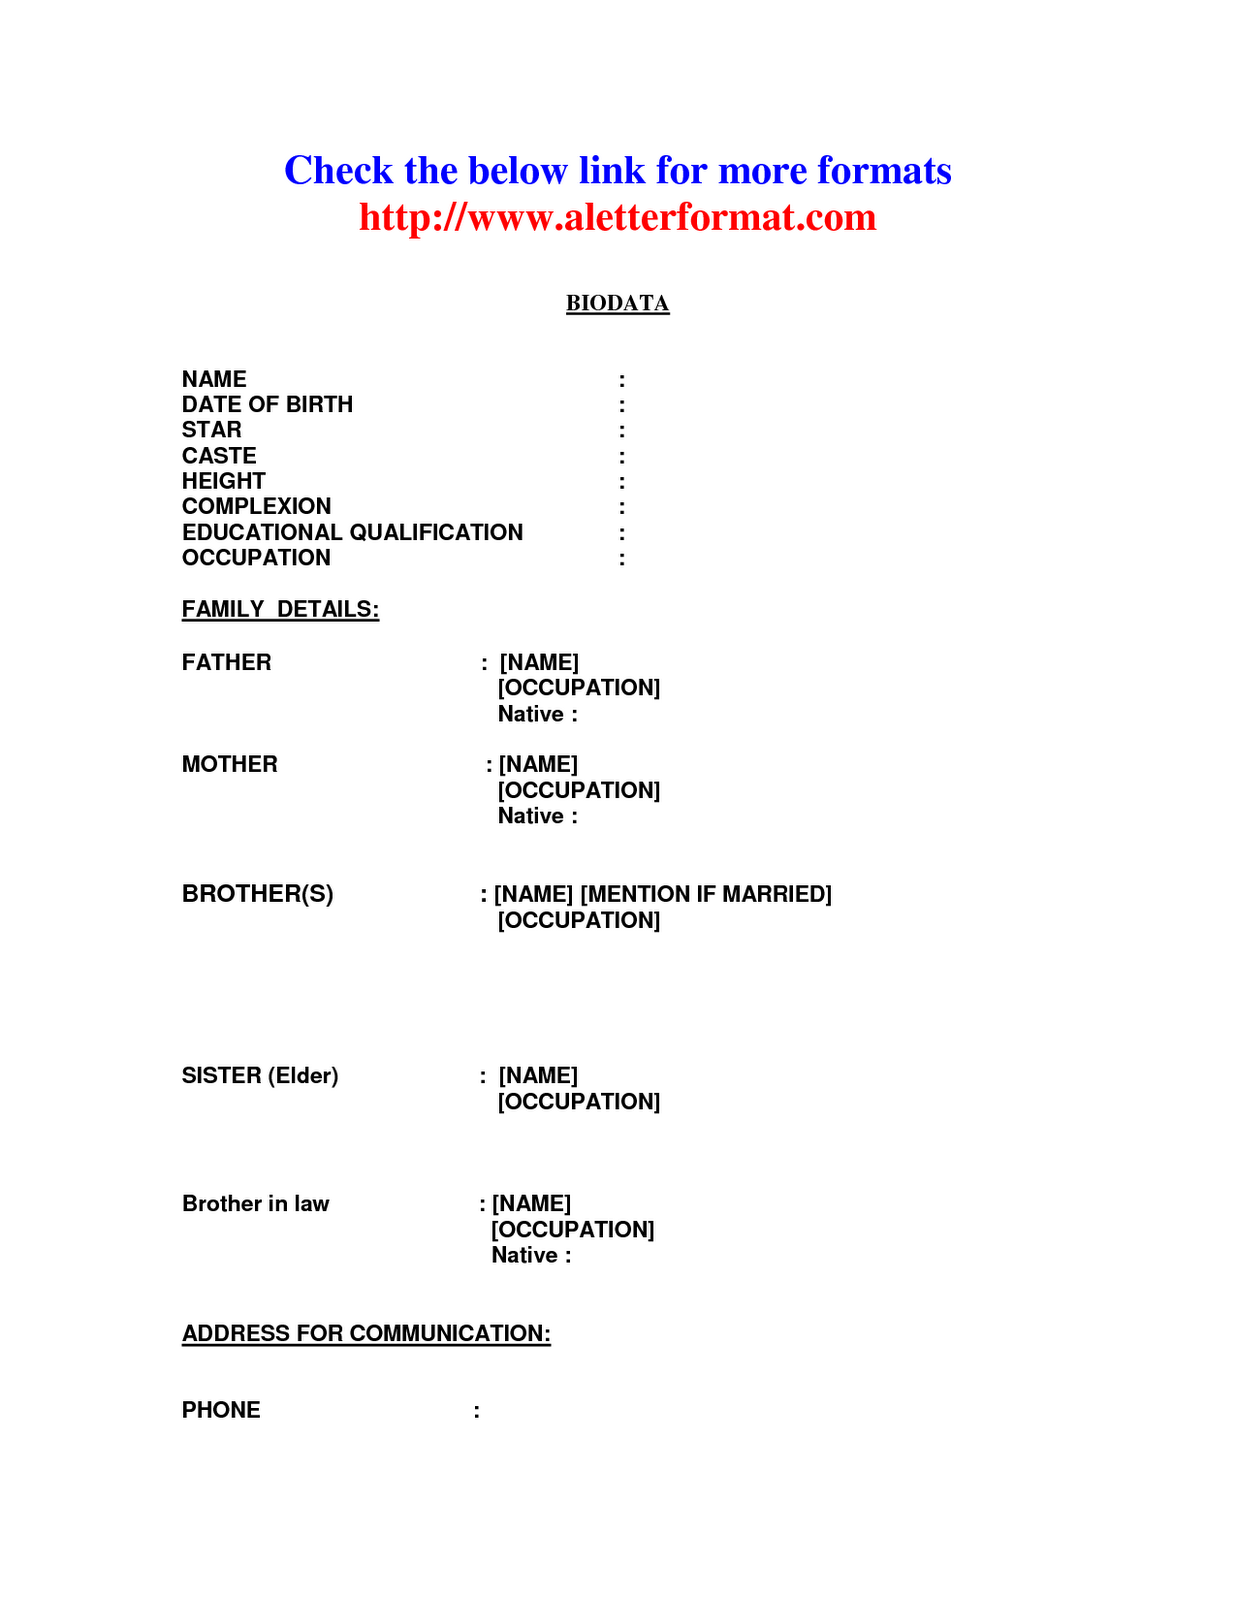 Resume submittal form